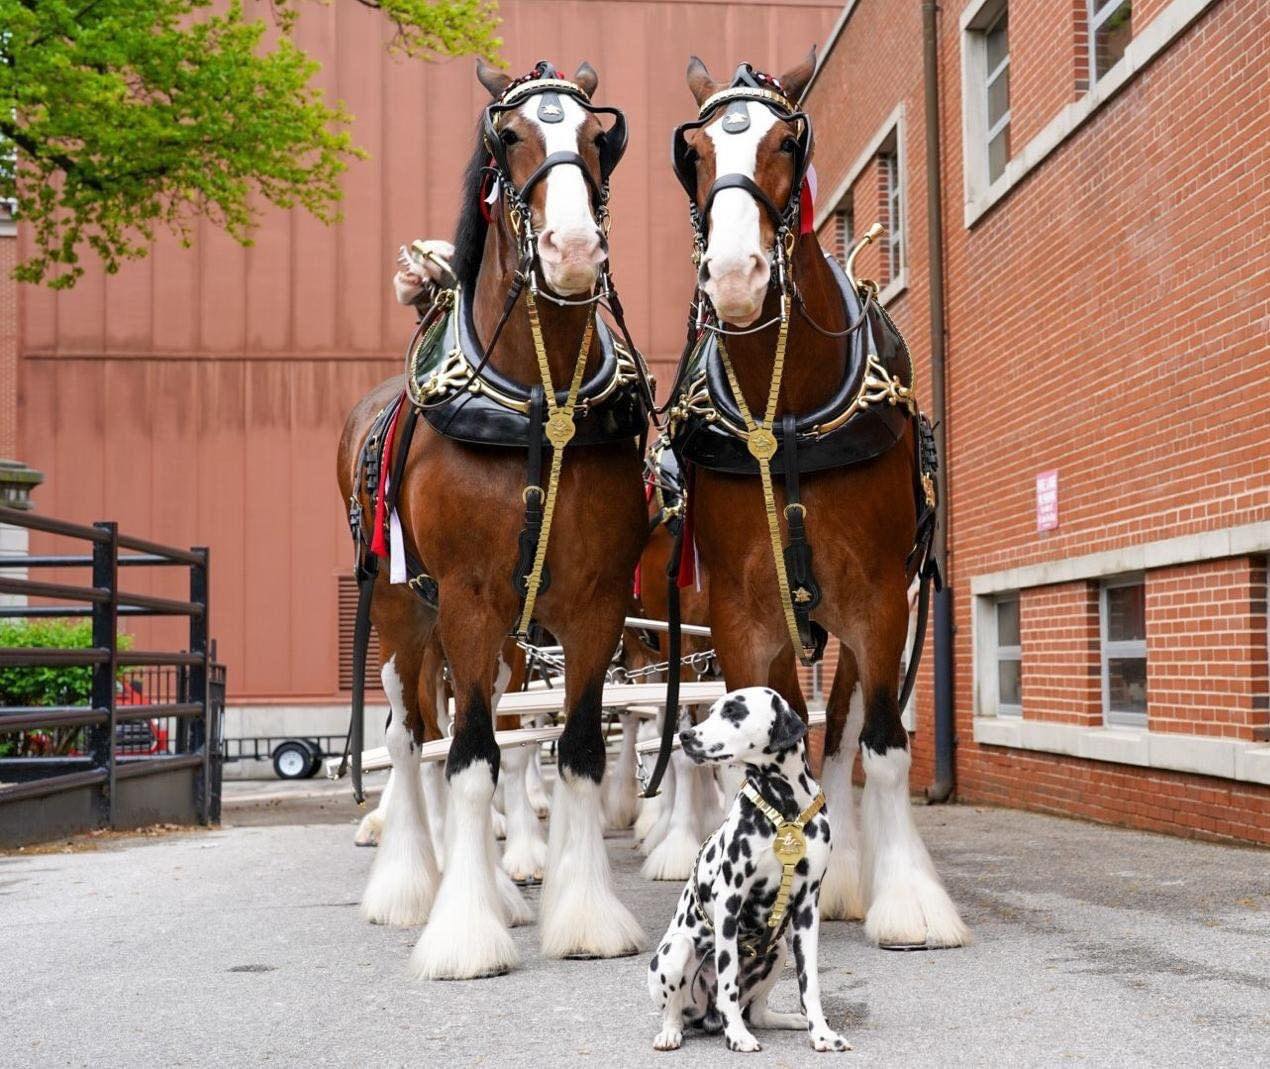 Budweiser Clydesdales Return to THE AVENUE